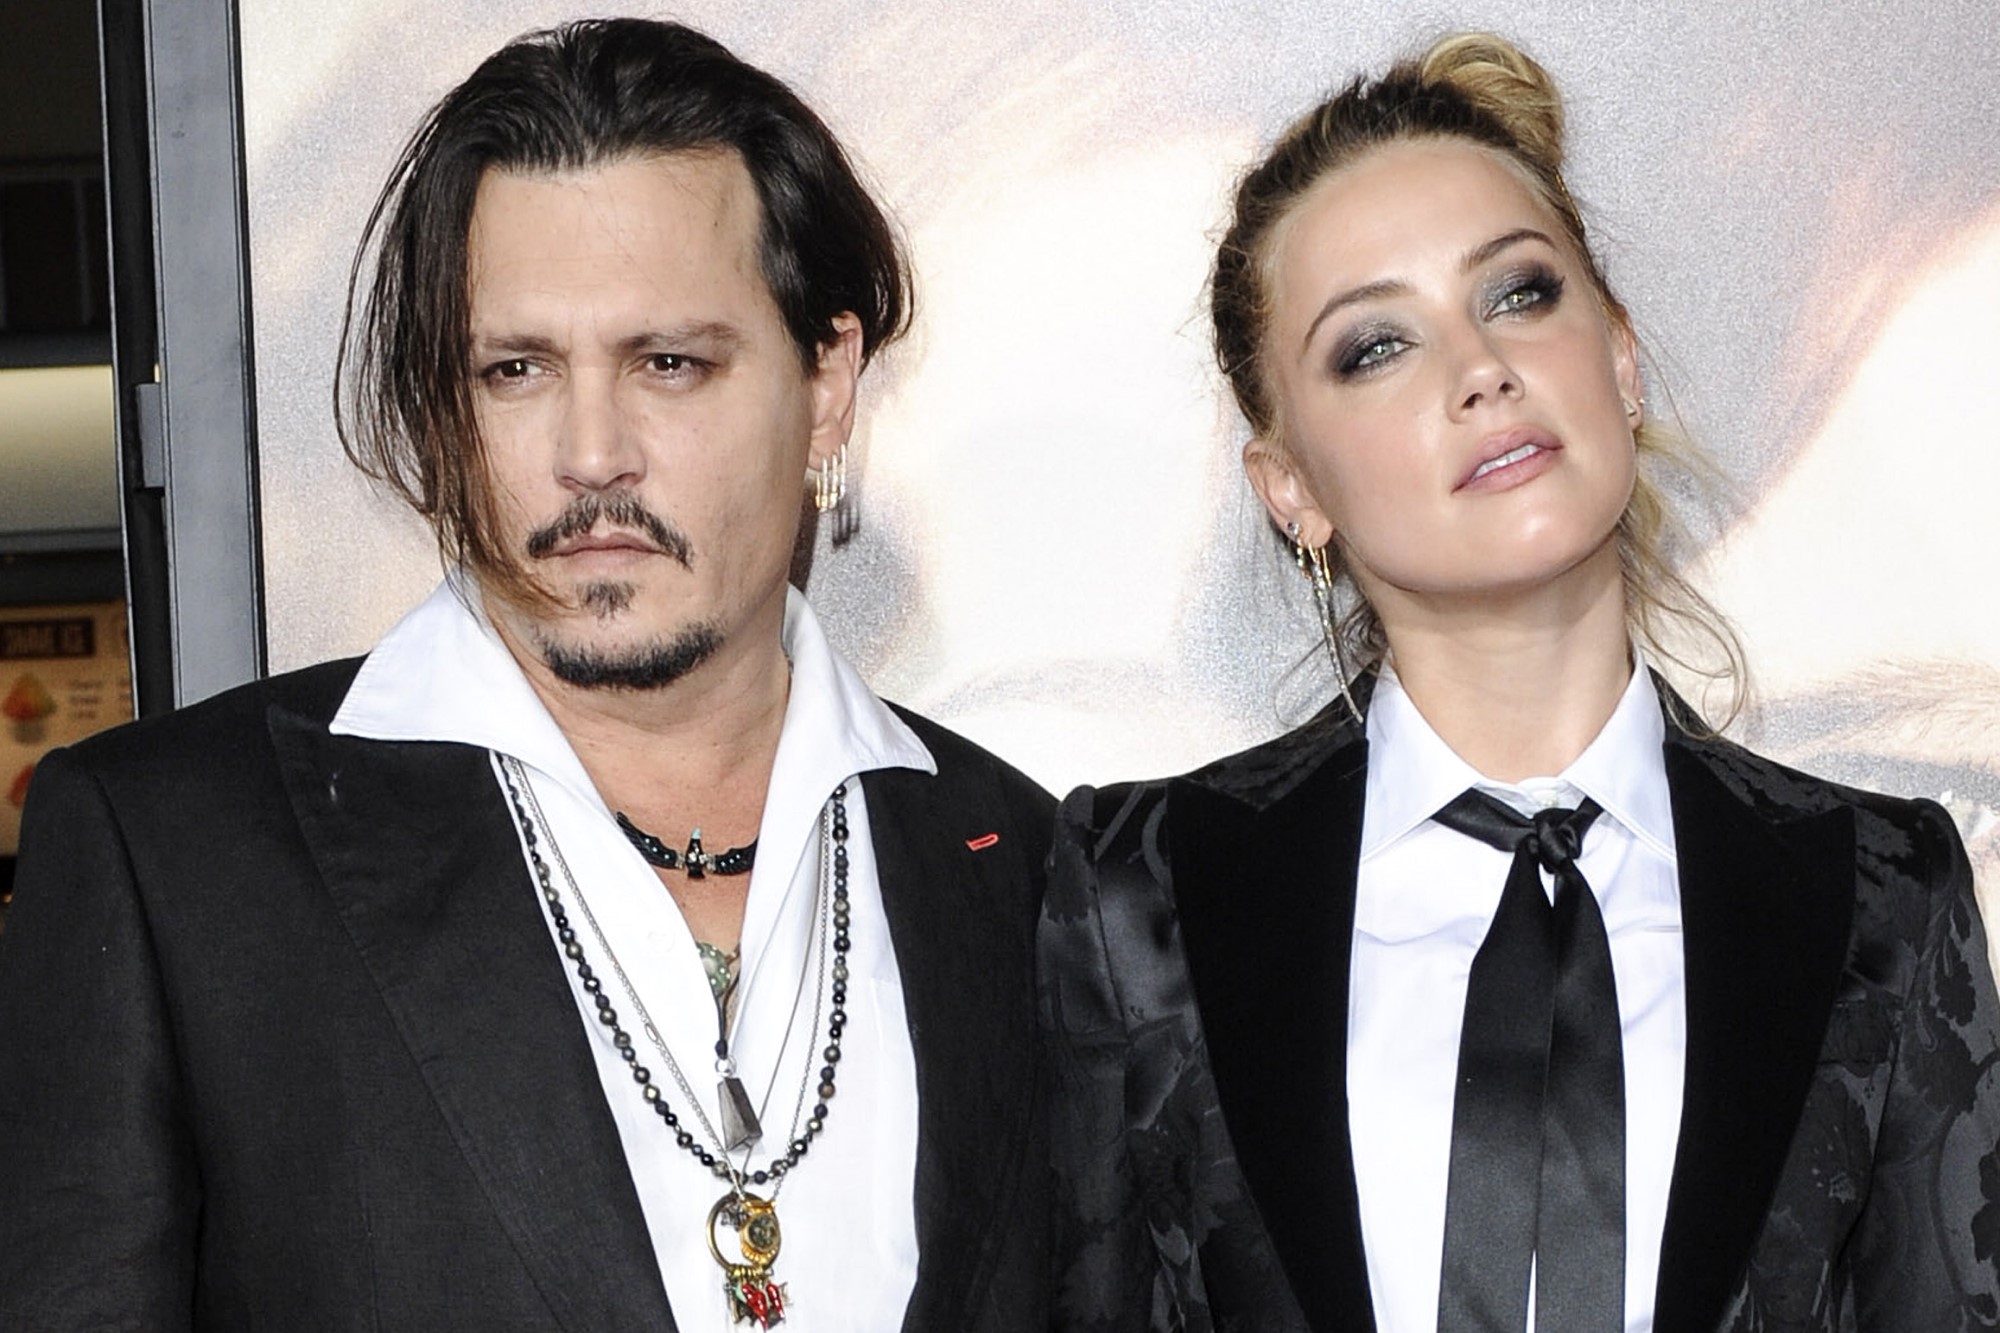 photograph of Johnny Depp and Amber Heard at event